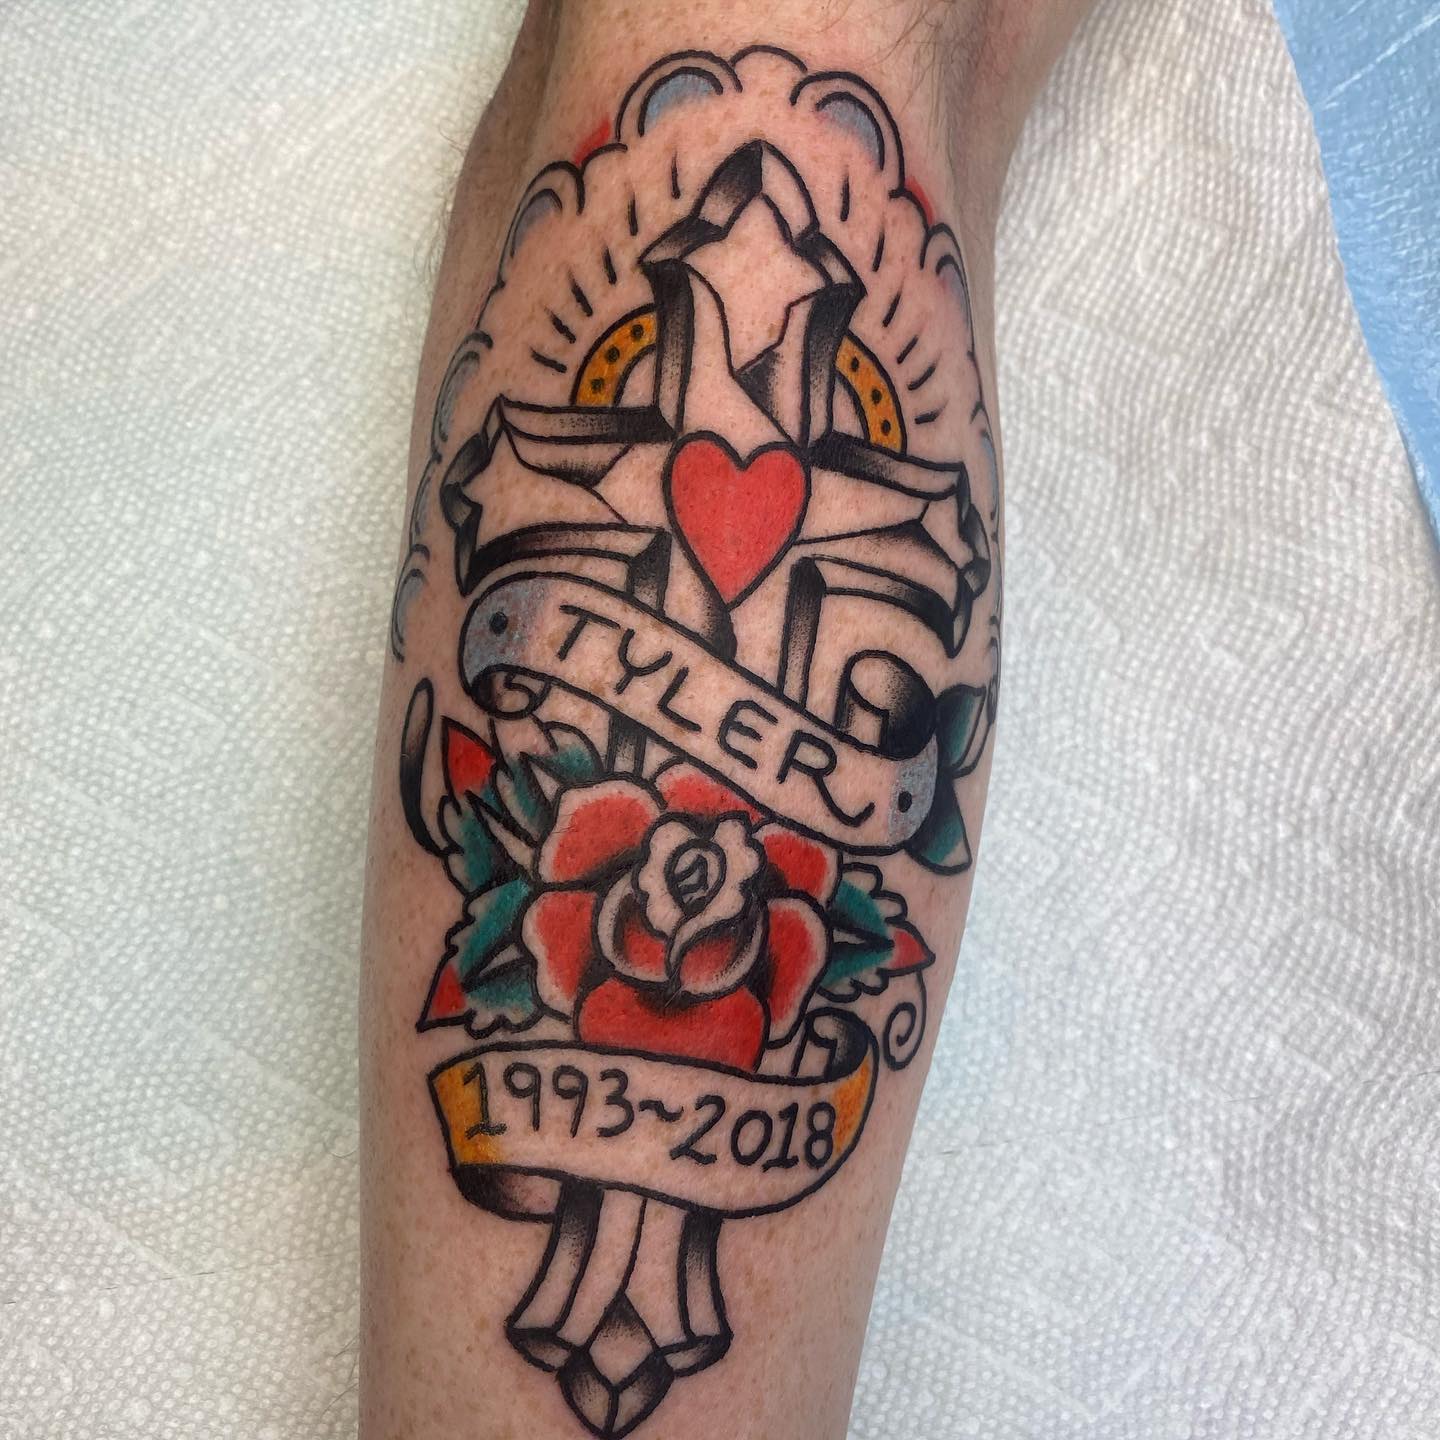 Memorial tattoos allow people to keep their loved ones on their body forever. In order to symbolize that you send your loved one to heaven, let's get a cross tattoo with a red rose and honor them in a perfect way.